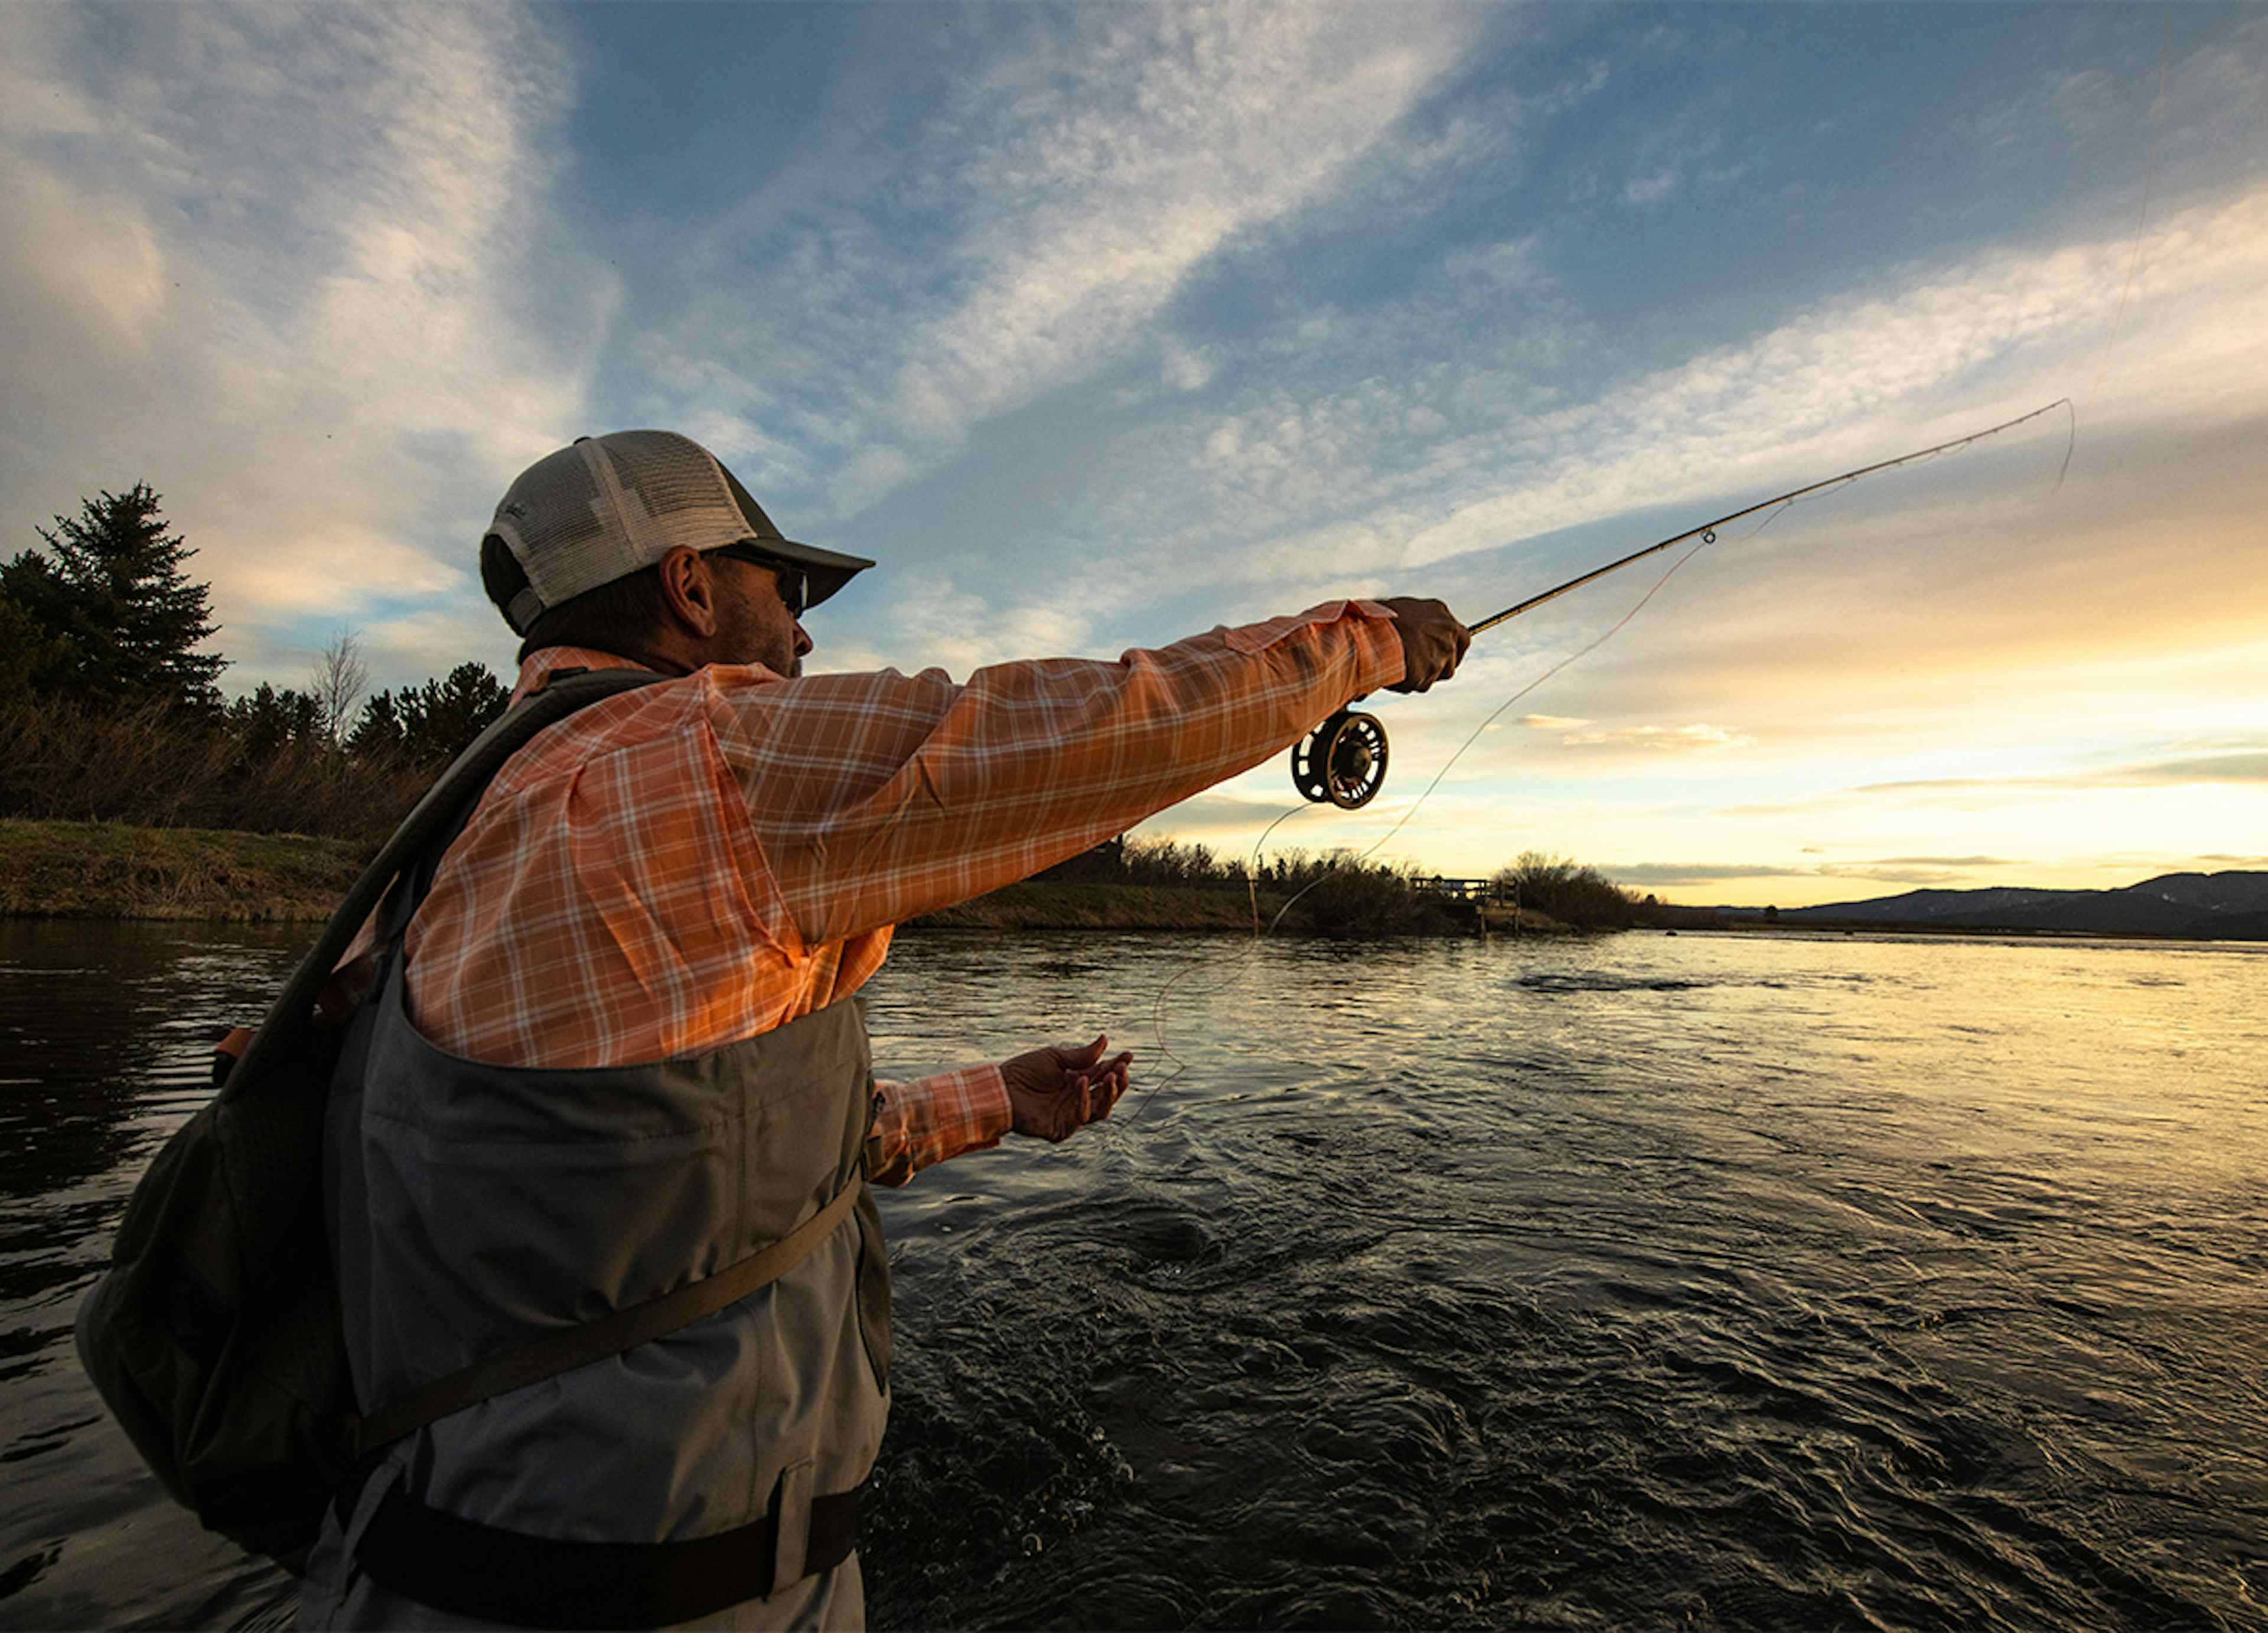 Fly fishing on the Henry's Fork of the Snake River in Island Park, ID, a part of Yellowstone Teton Territory.